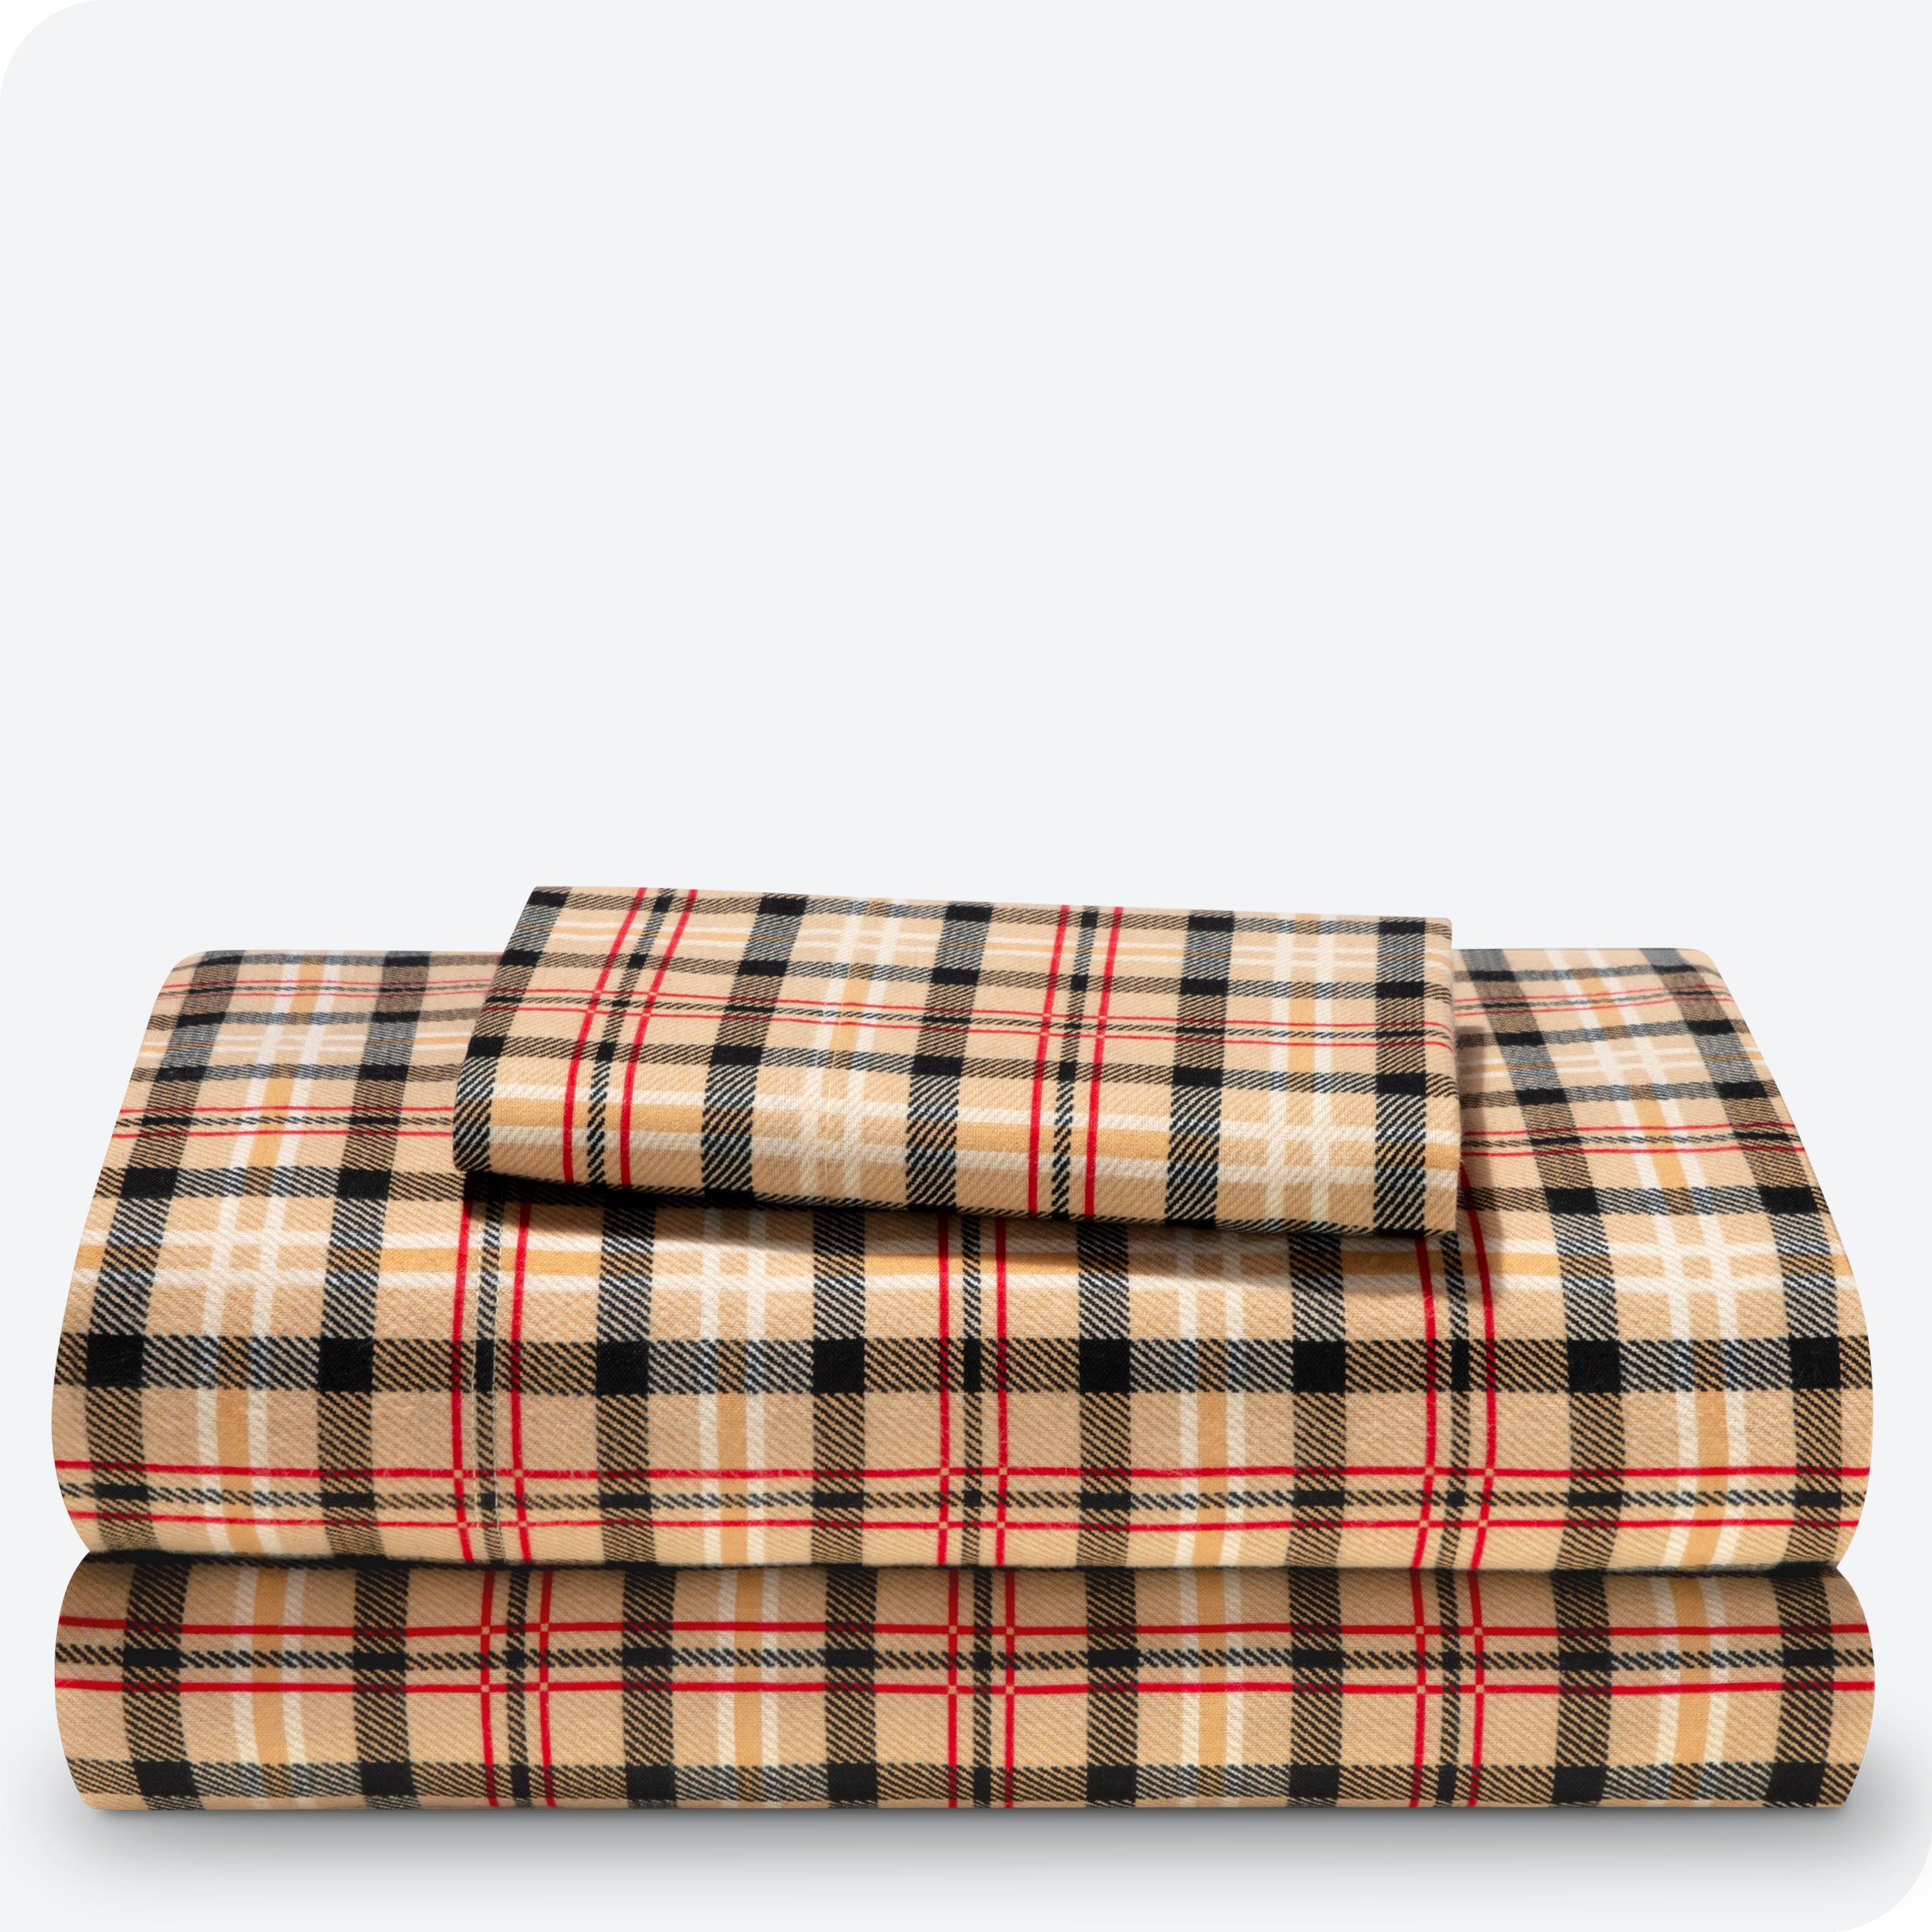 Flannel print sheet set folded and stacked neatly on a white background